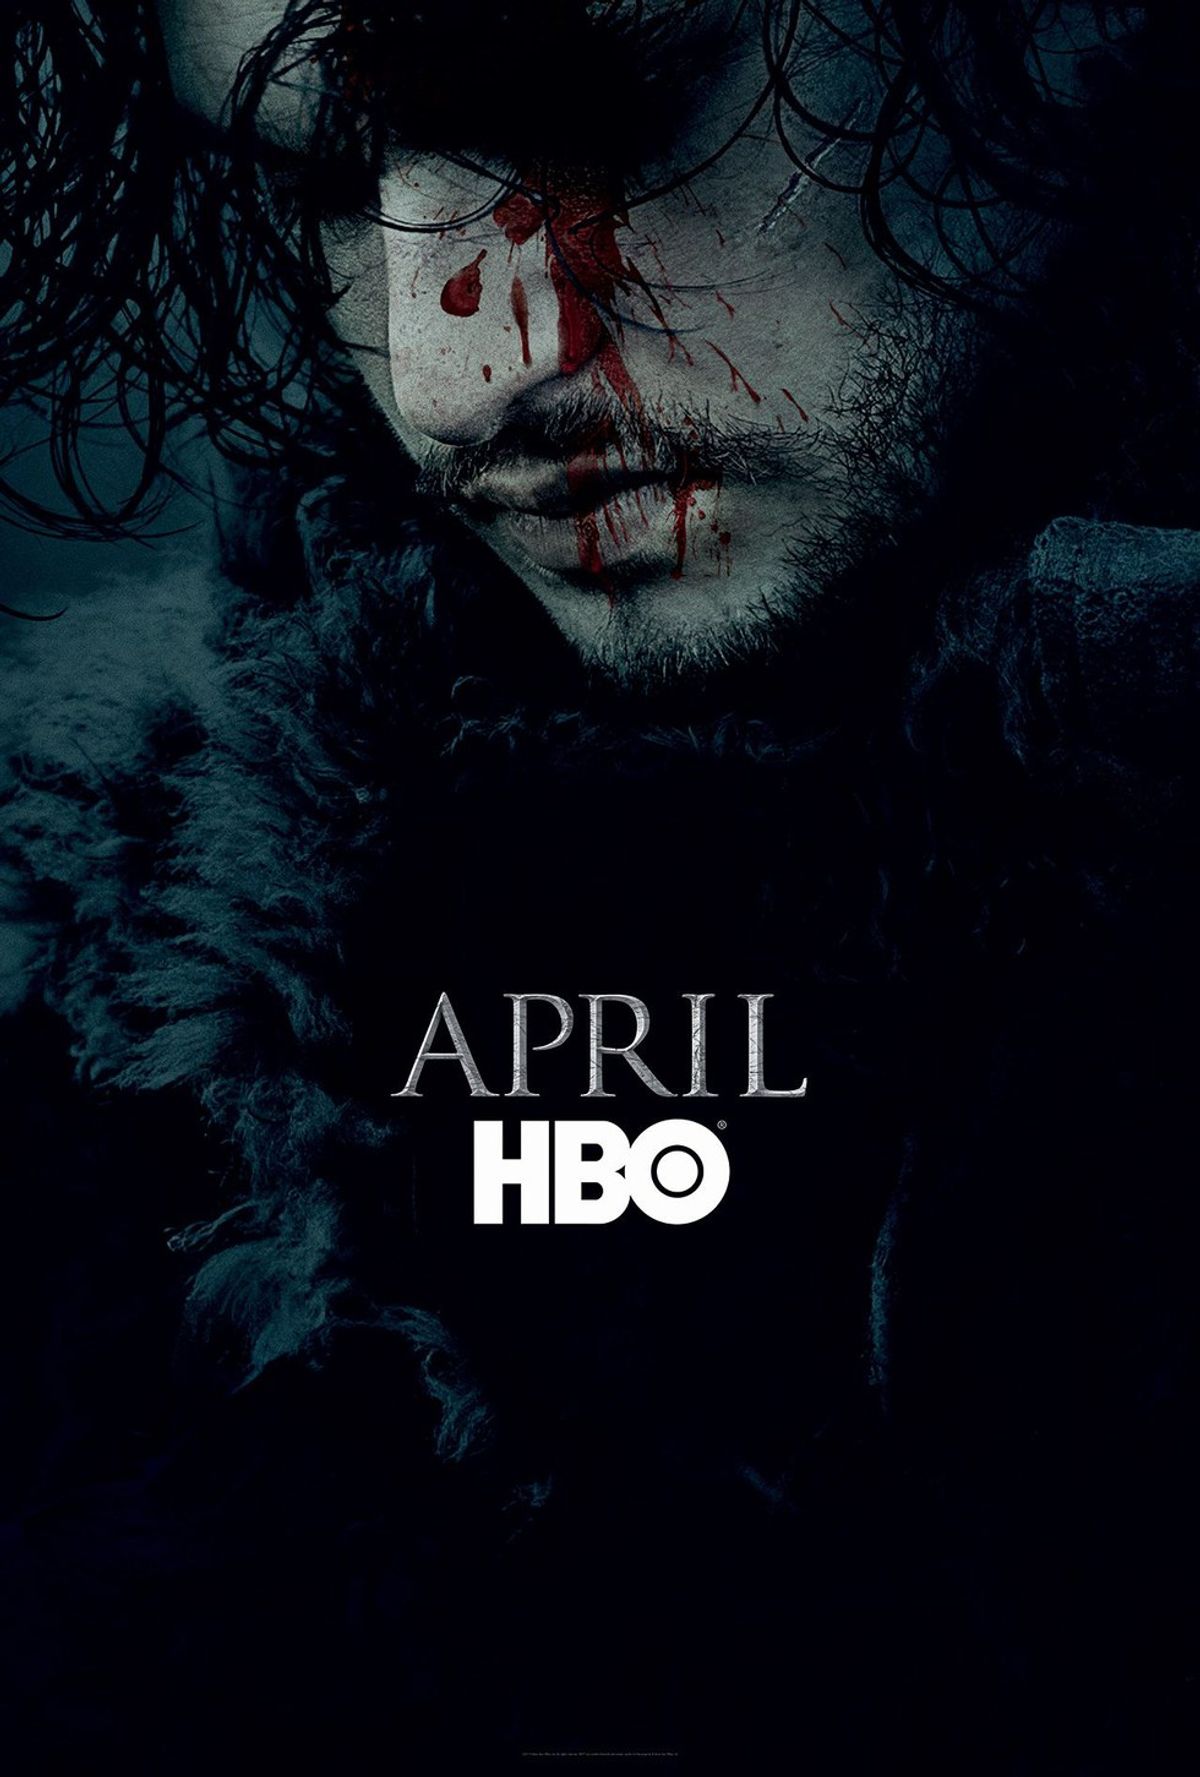 Game of Thrones: Season 6 Poster Reveal